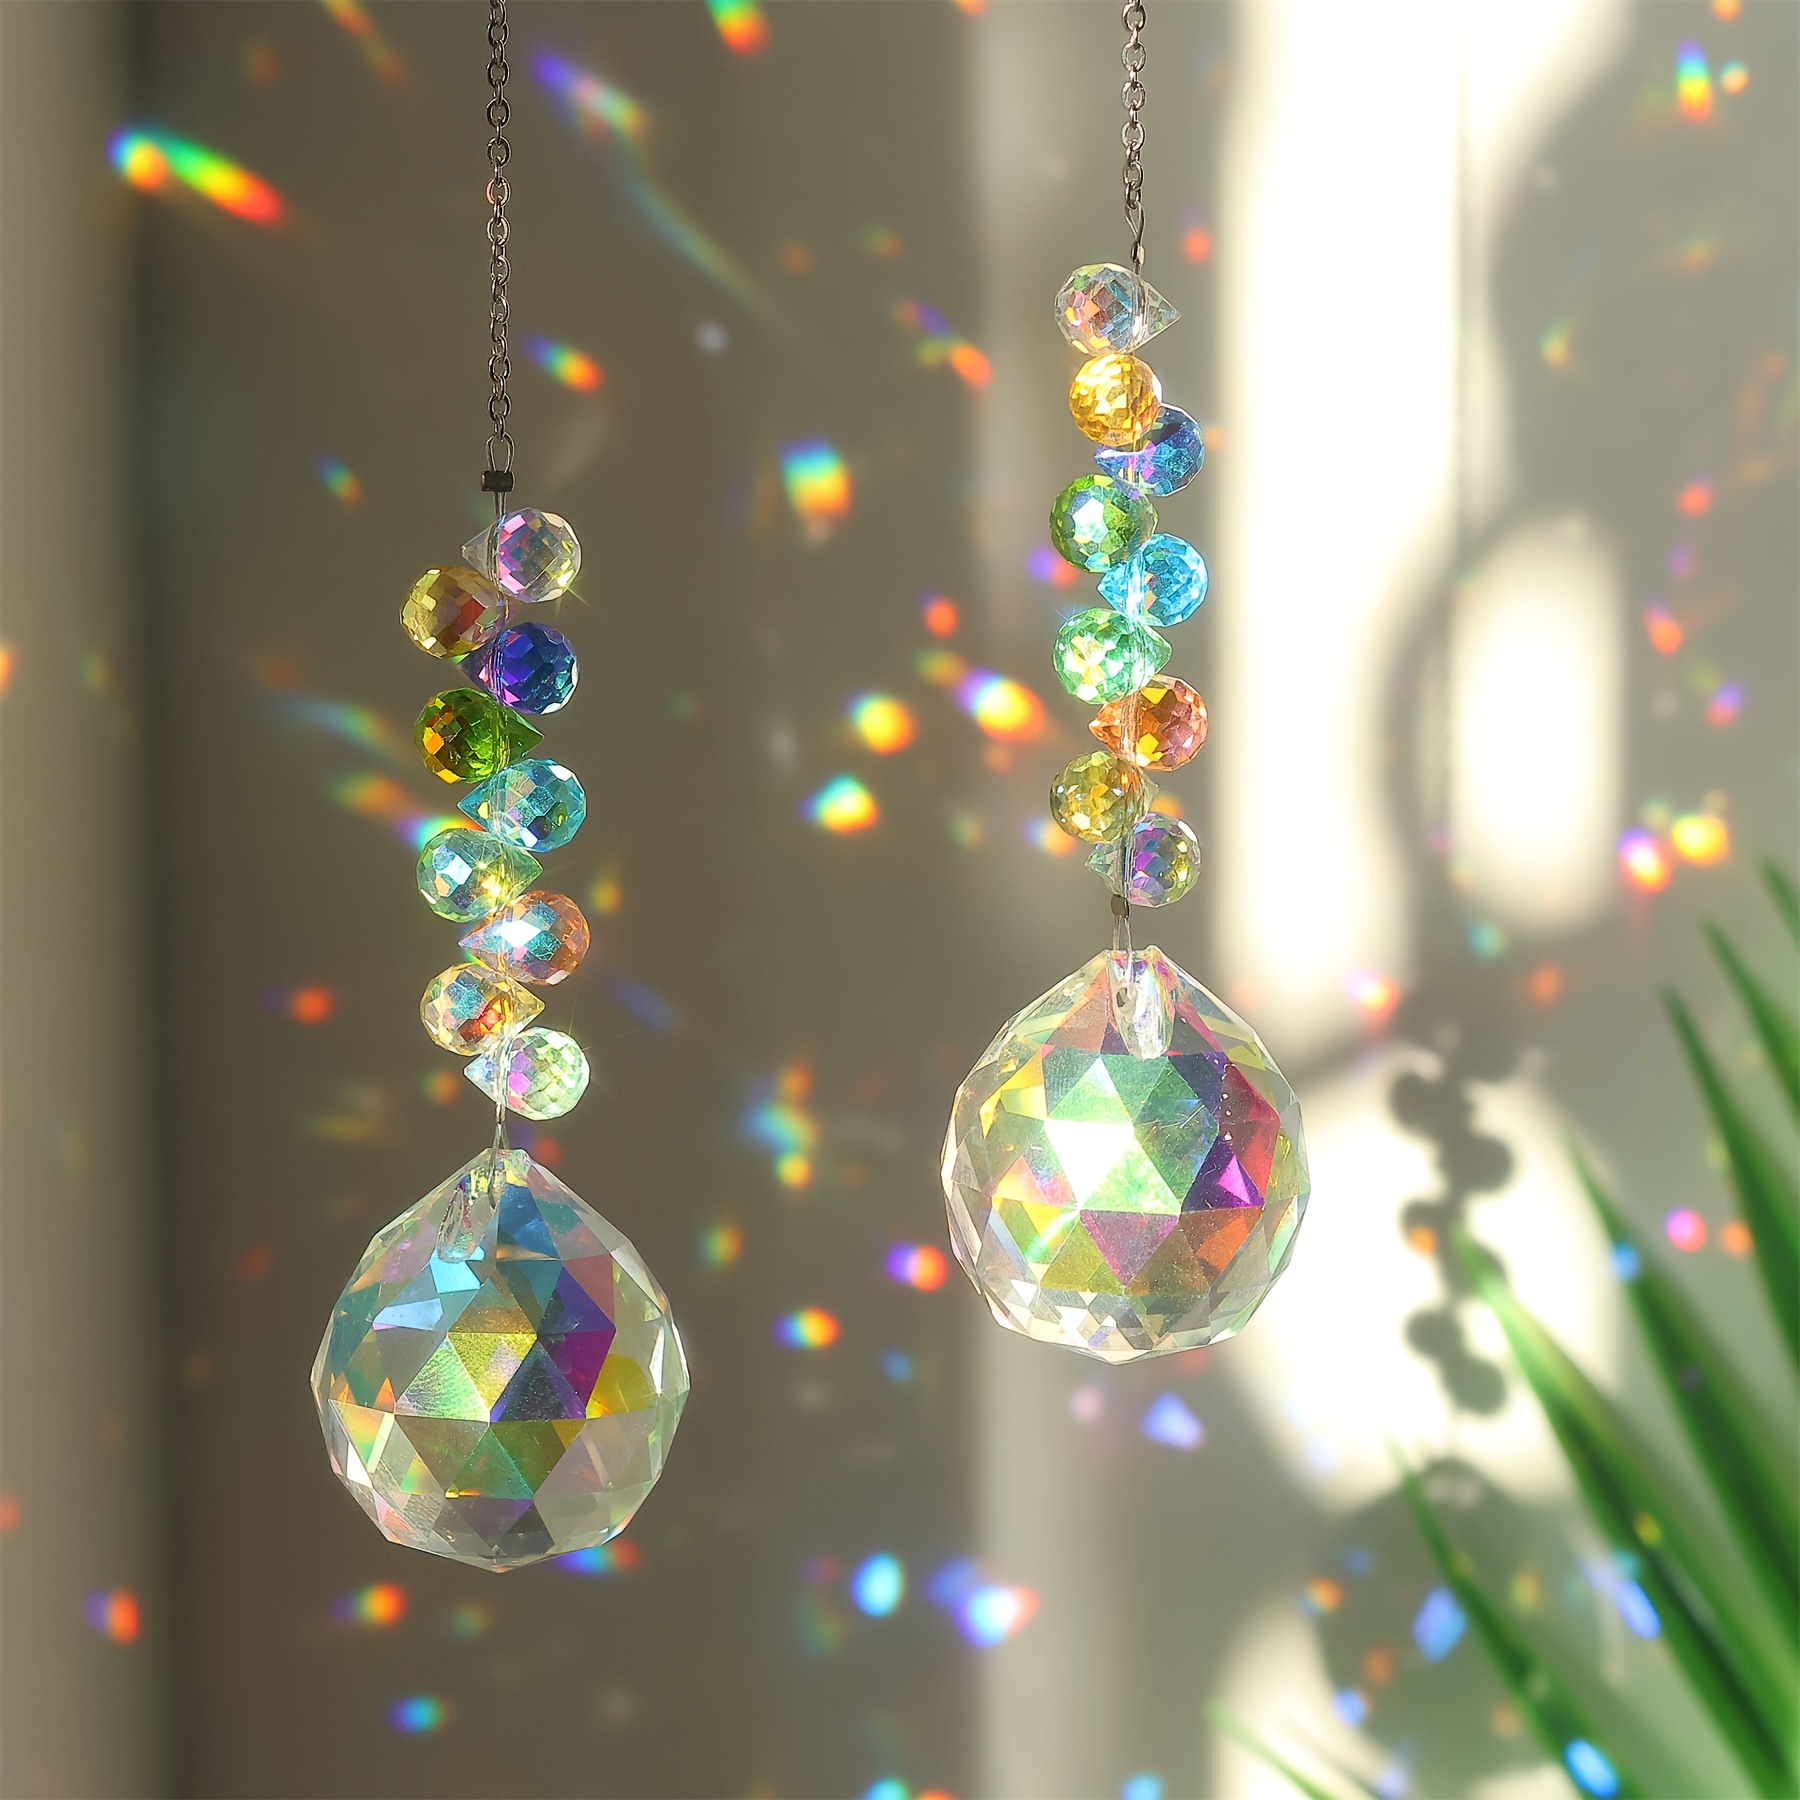 

1pc Strawberry Bead Crystal Ball Sun Catcher - Hanging Prism For Garden & Home Decor, Glass/iron